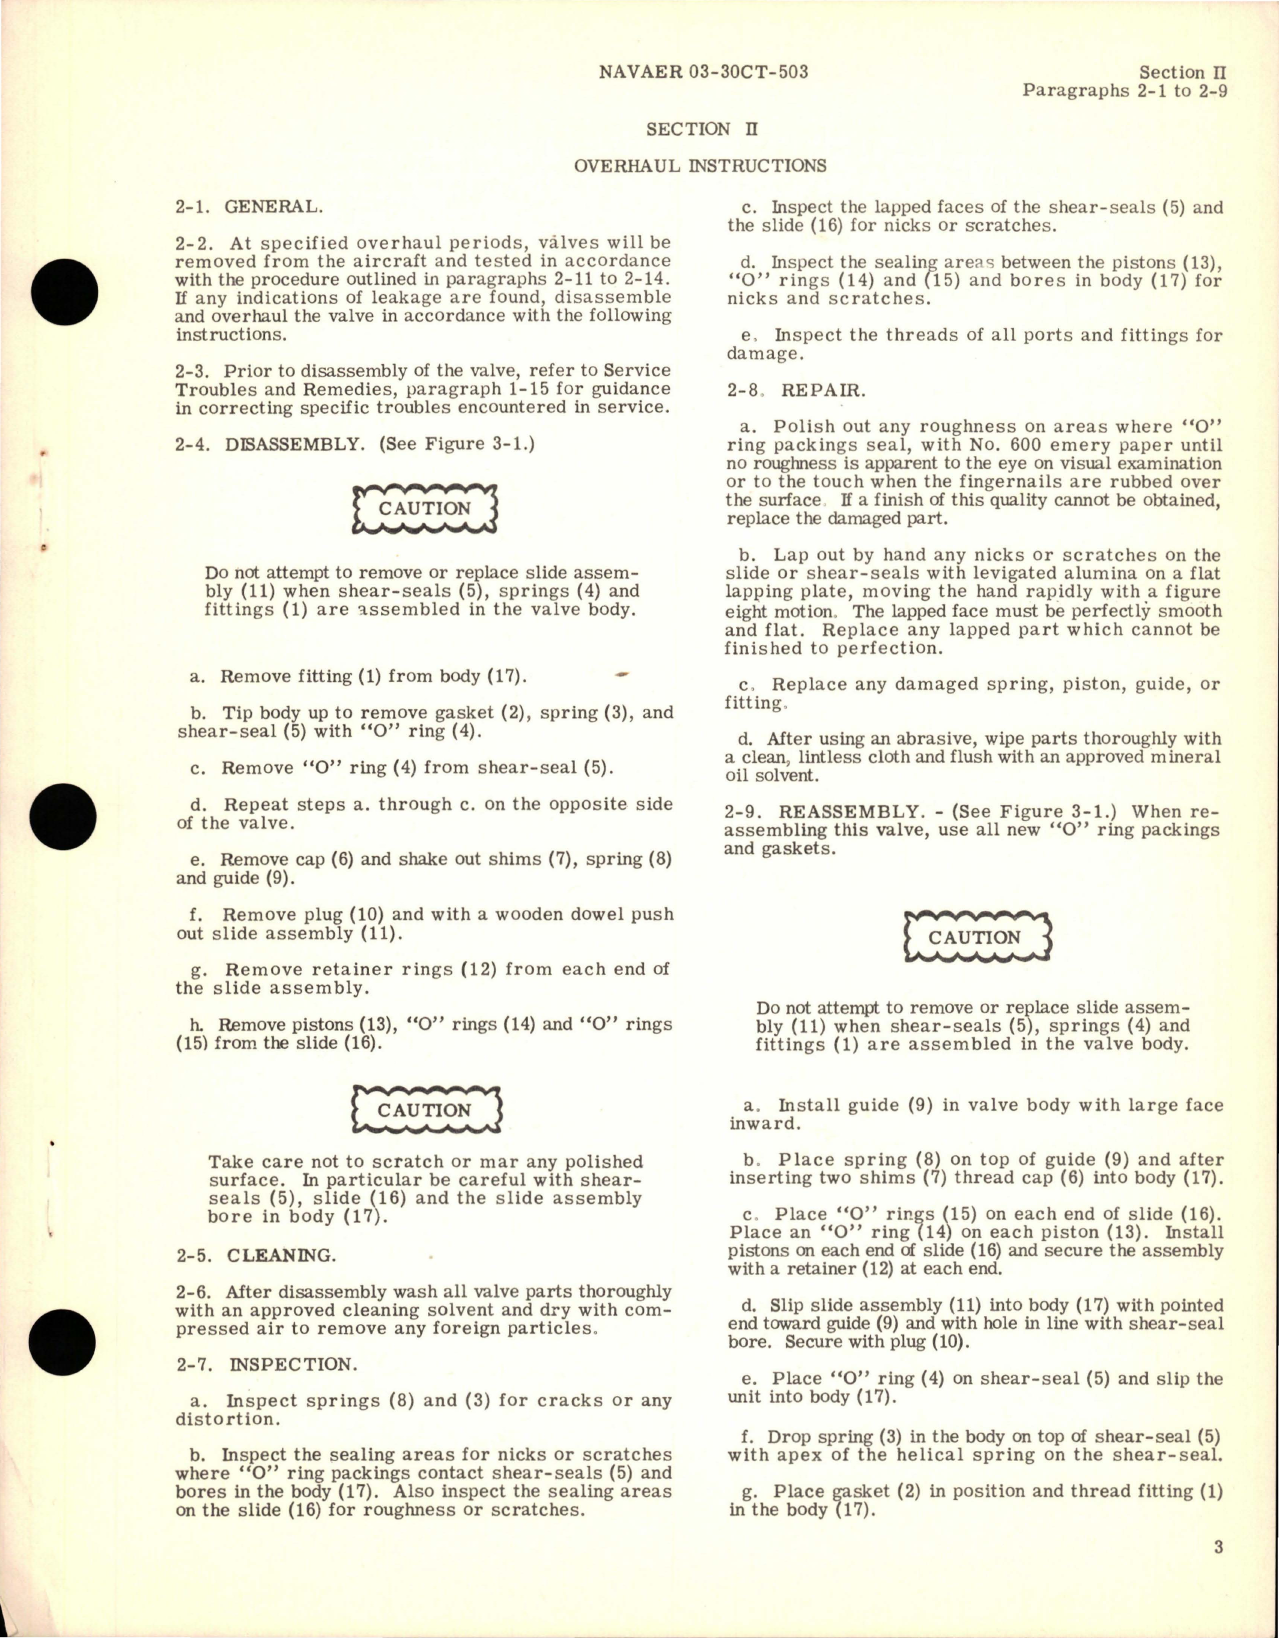 Sample page 5 from AirCorps Library document: Operation, Service, Overhaul Instructions with Parts for Double Seal Pressure Operated Bypass Valves - Models 2954-1 and 25954-2